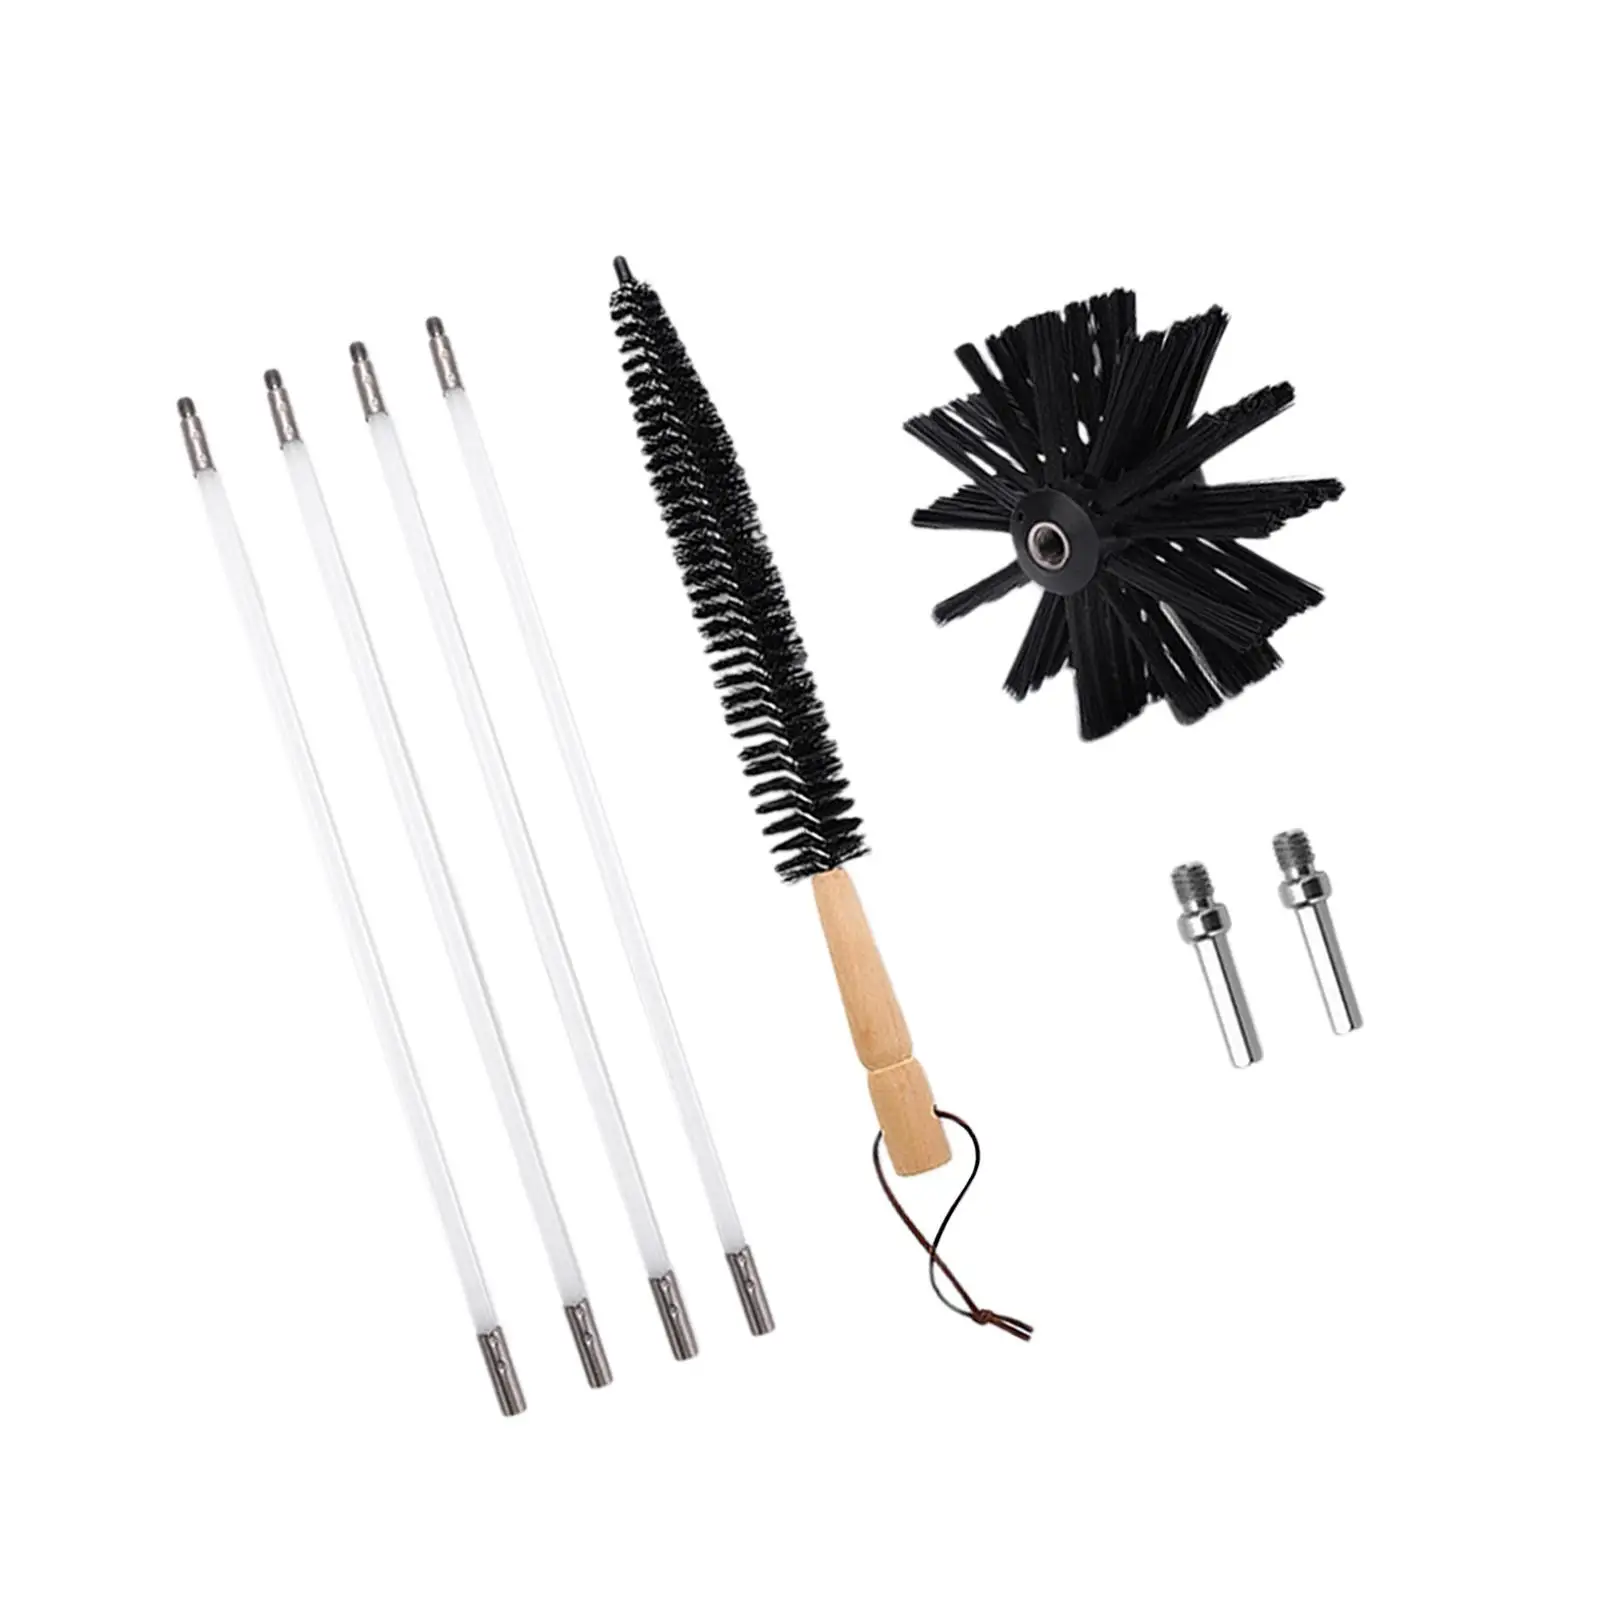 Dry Duct Cleaning Kit Flexible 4 Rods with Brush Head and Dryer Lint Brush, Heat Resistant Nylon Brush Bendable Rods Durable